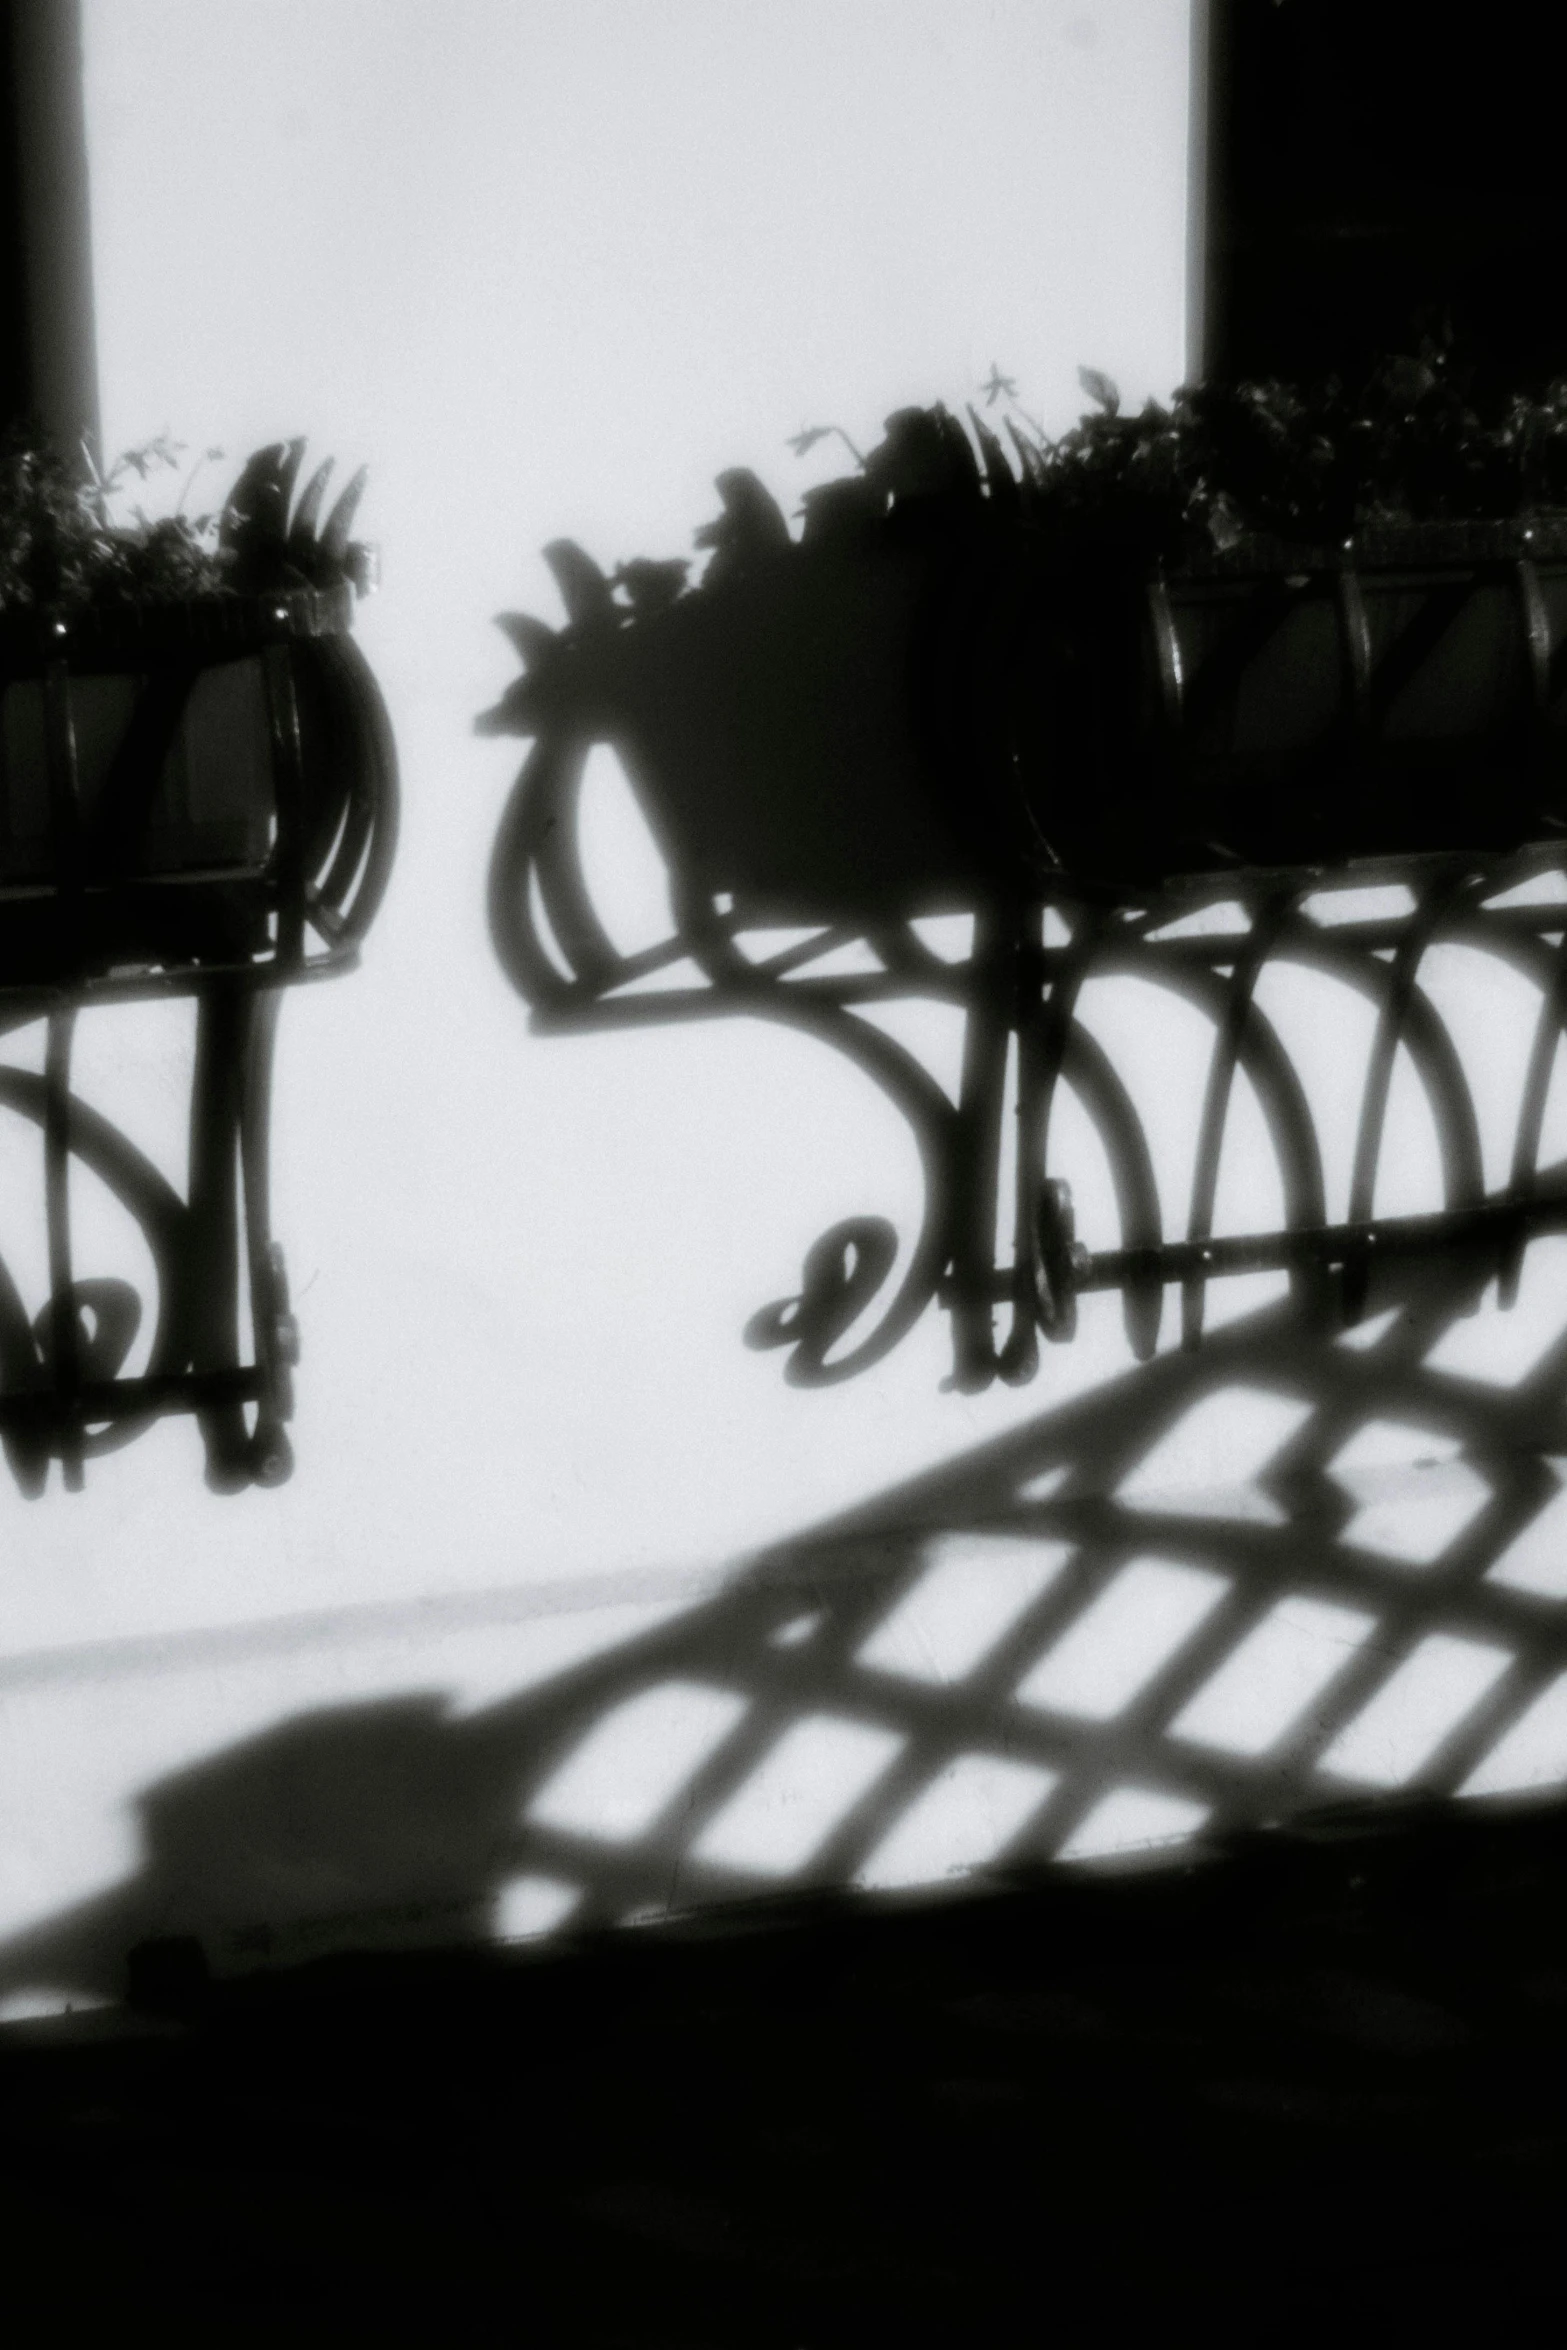 shadows cast on the walls of potted plants and benches